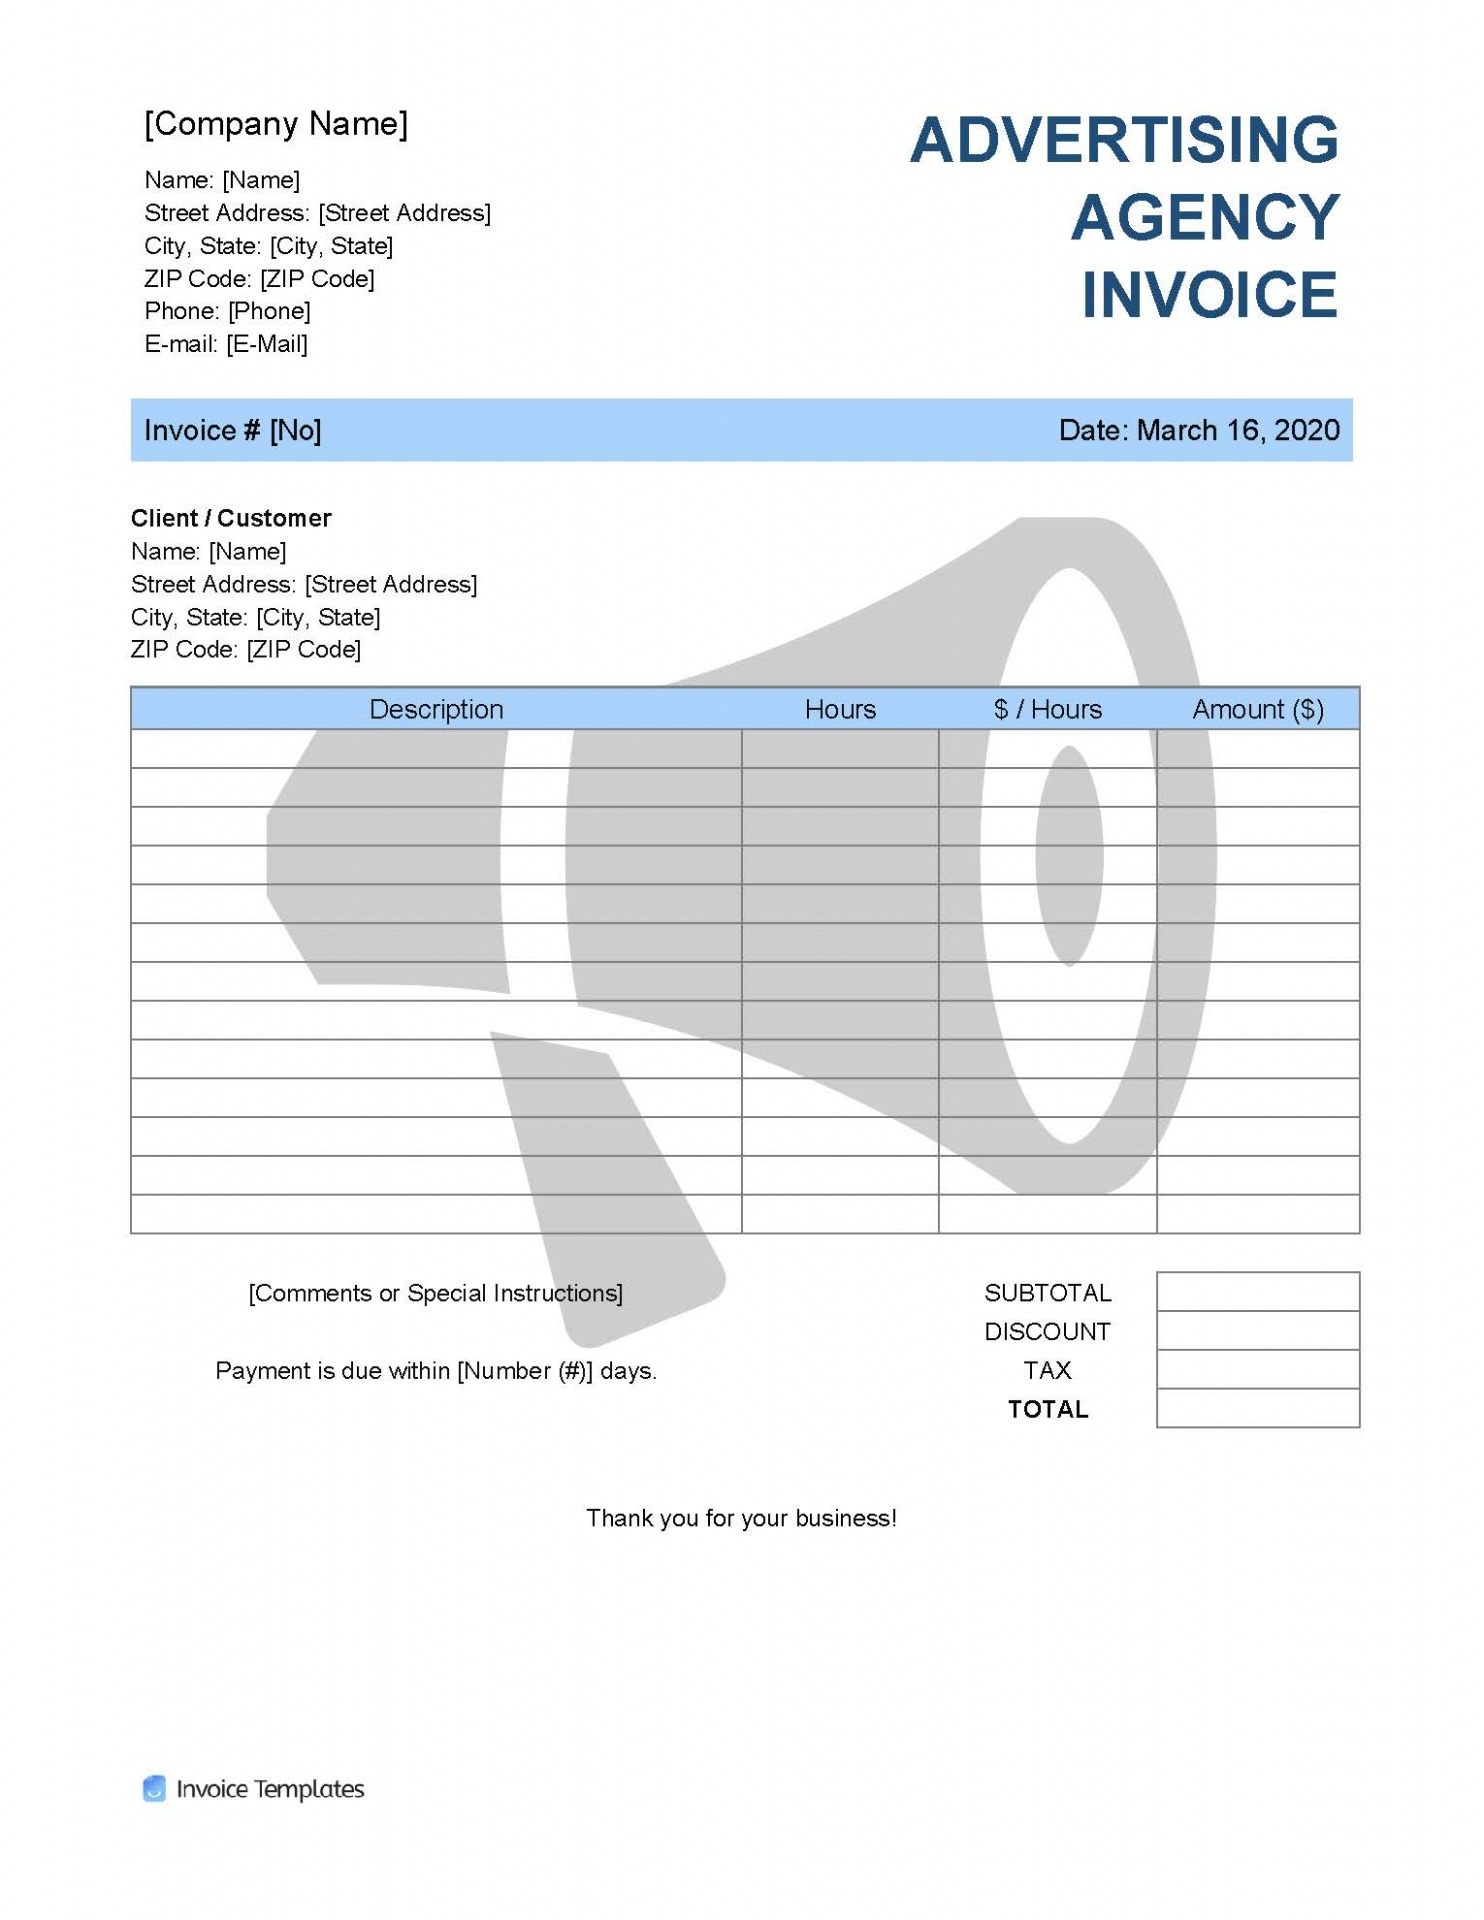 Printable Advertising Agency Invoice Template Docs